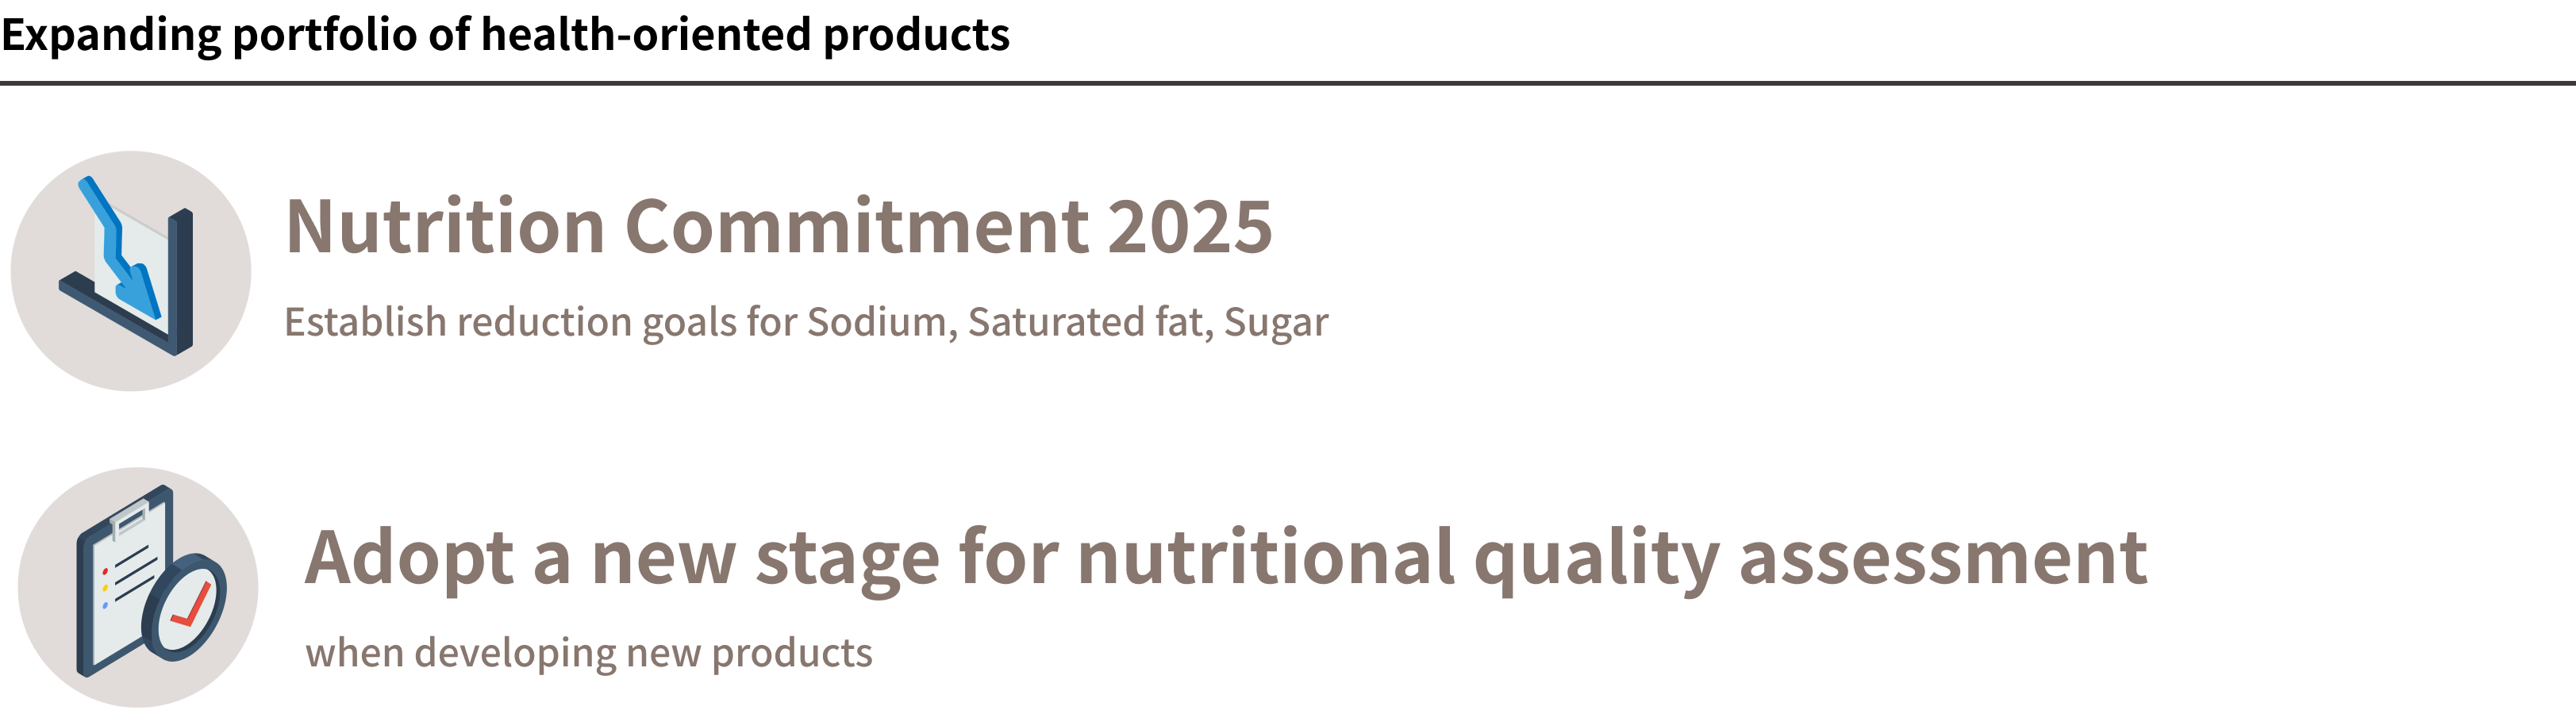 Establishment of Nutrition Policy Implementation